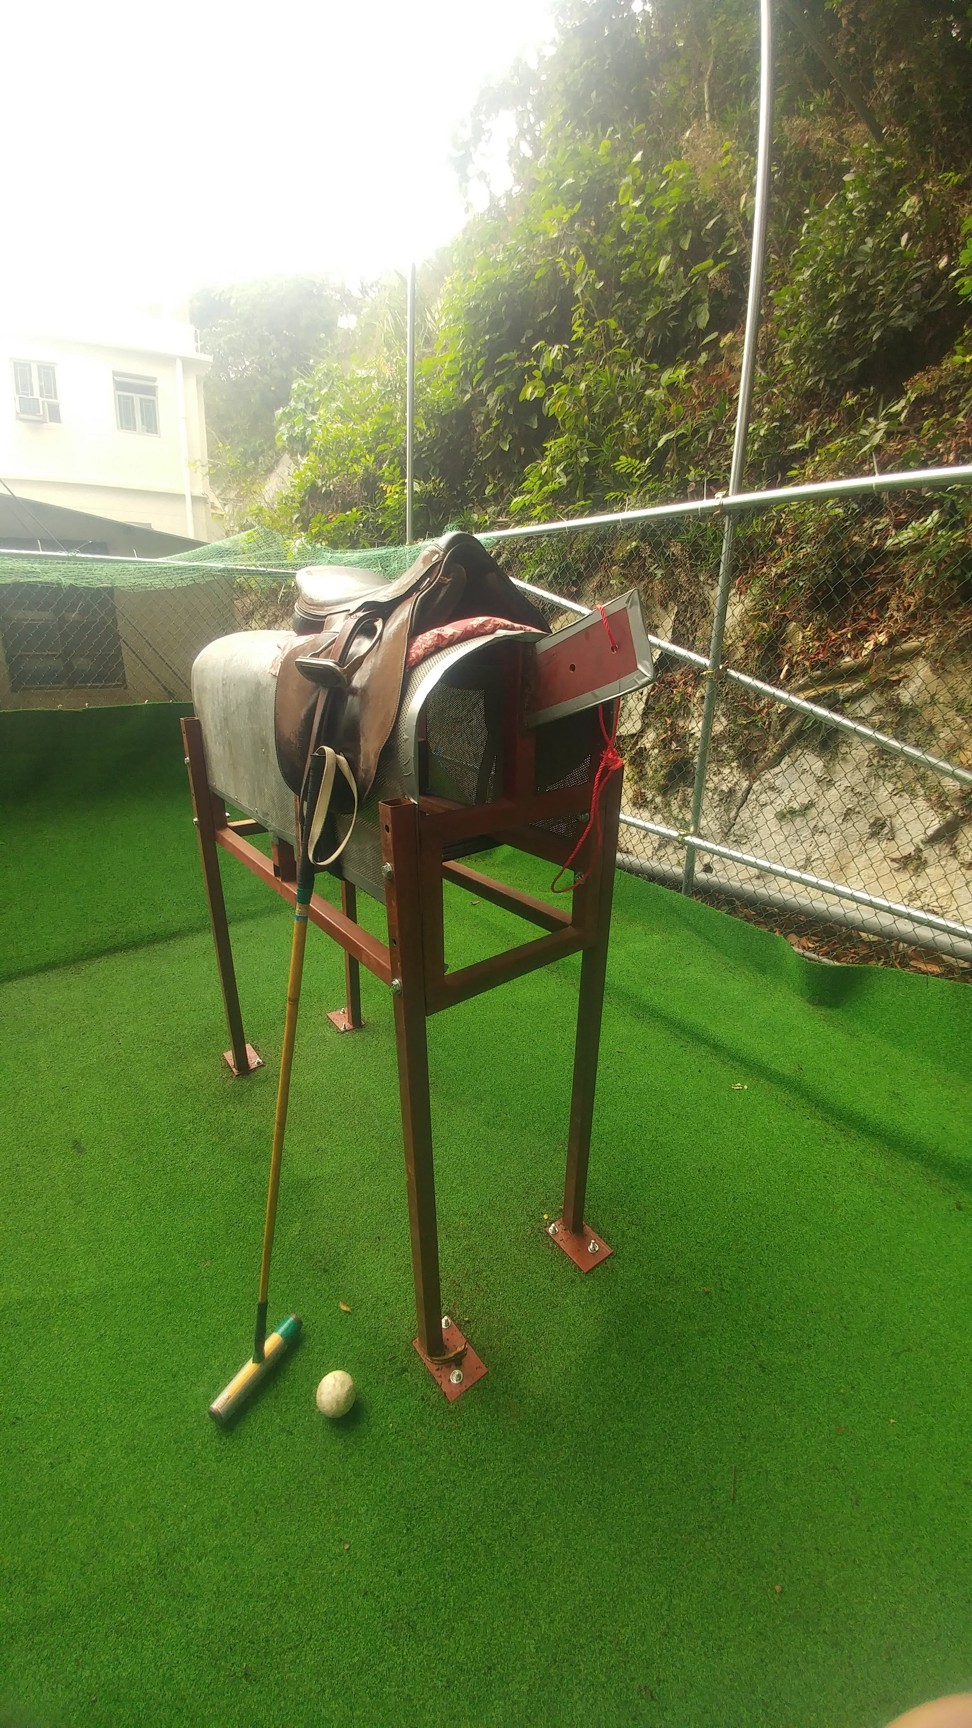 The wooden practice horse built by Andrew Leung in his backyard.